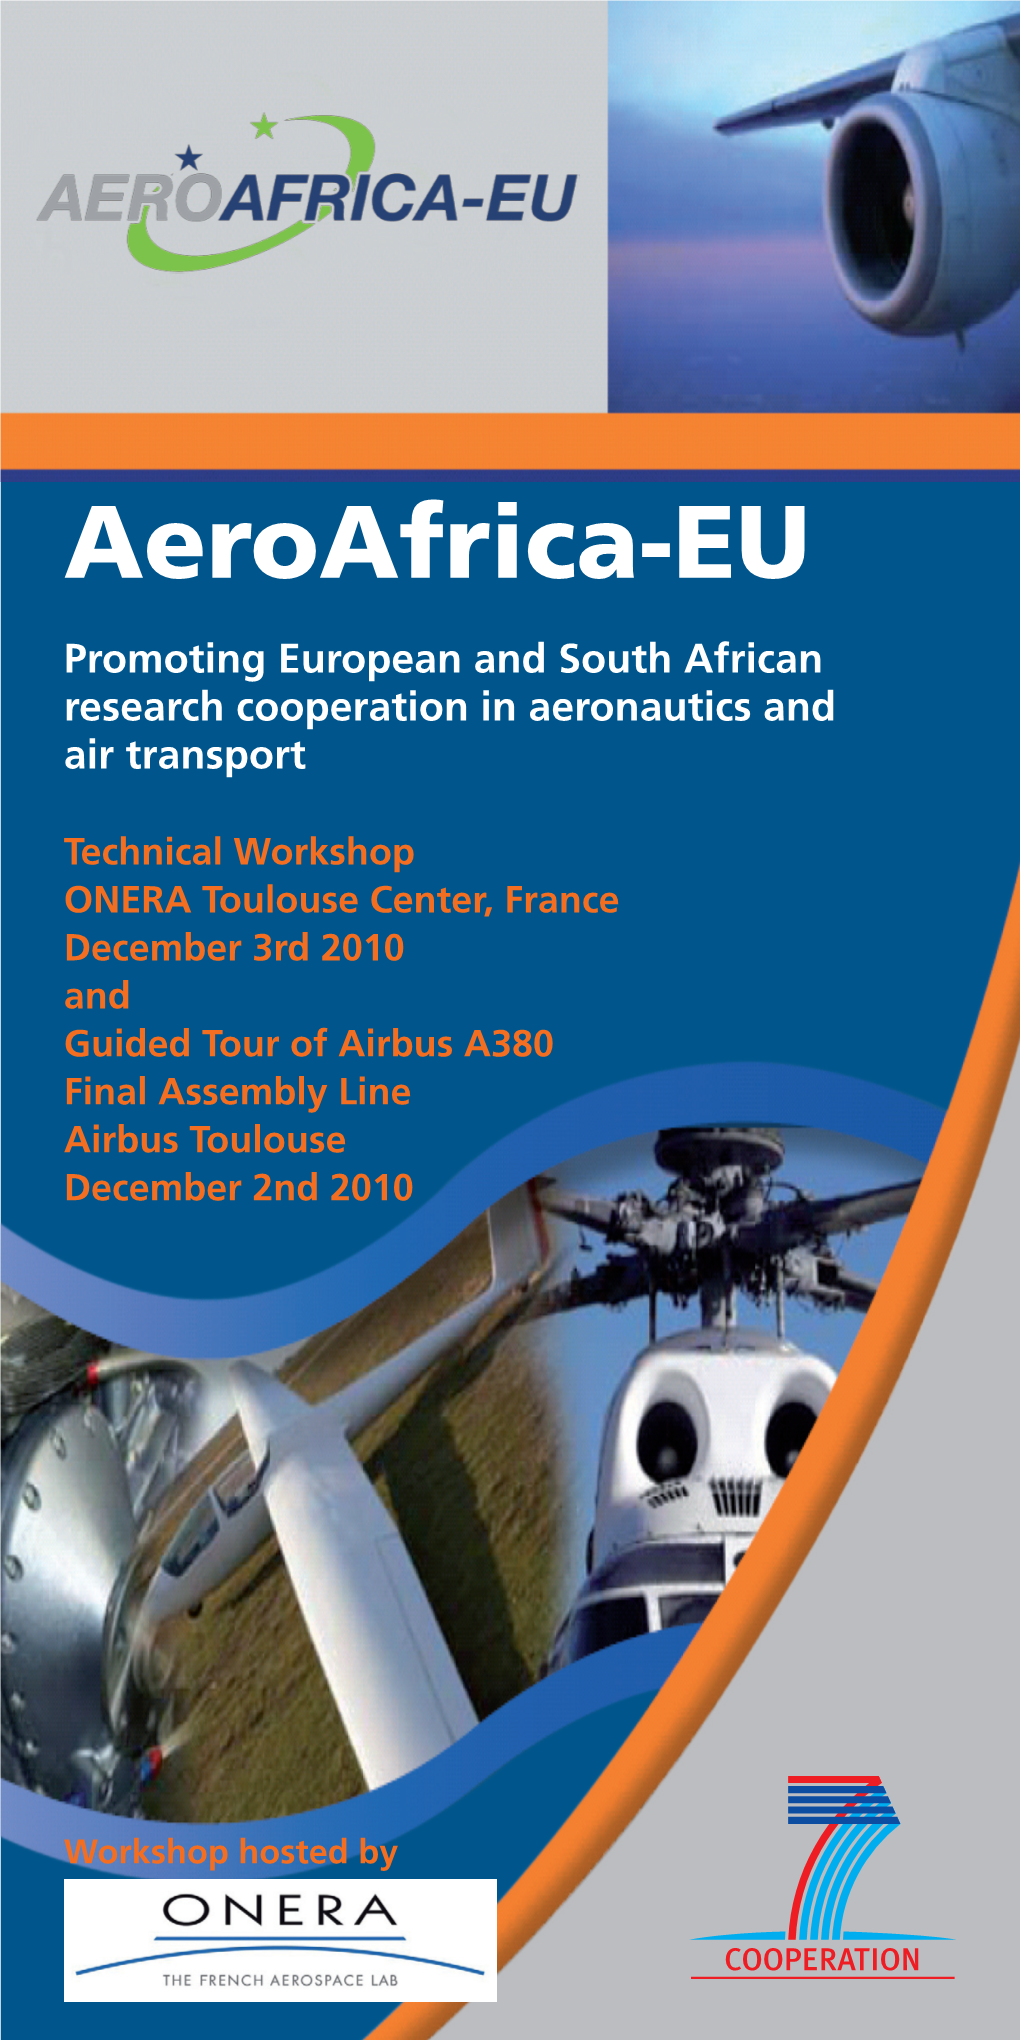 Aeroafrica-EU Promoting European and South African Research Cooperation in Aeronautics and Air Transport